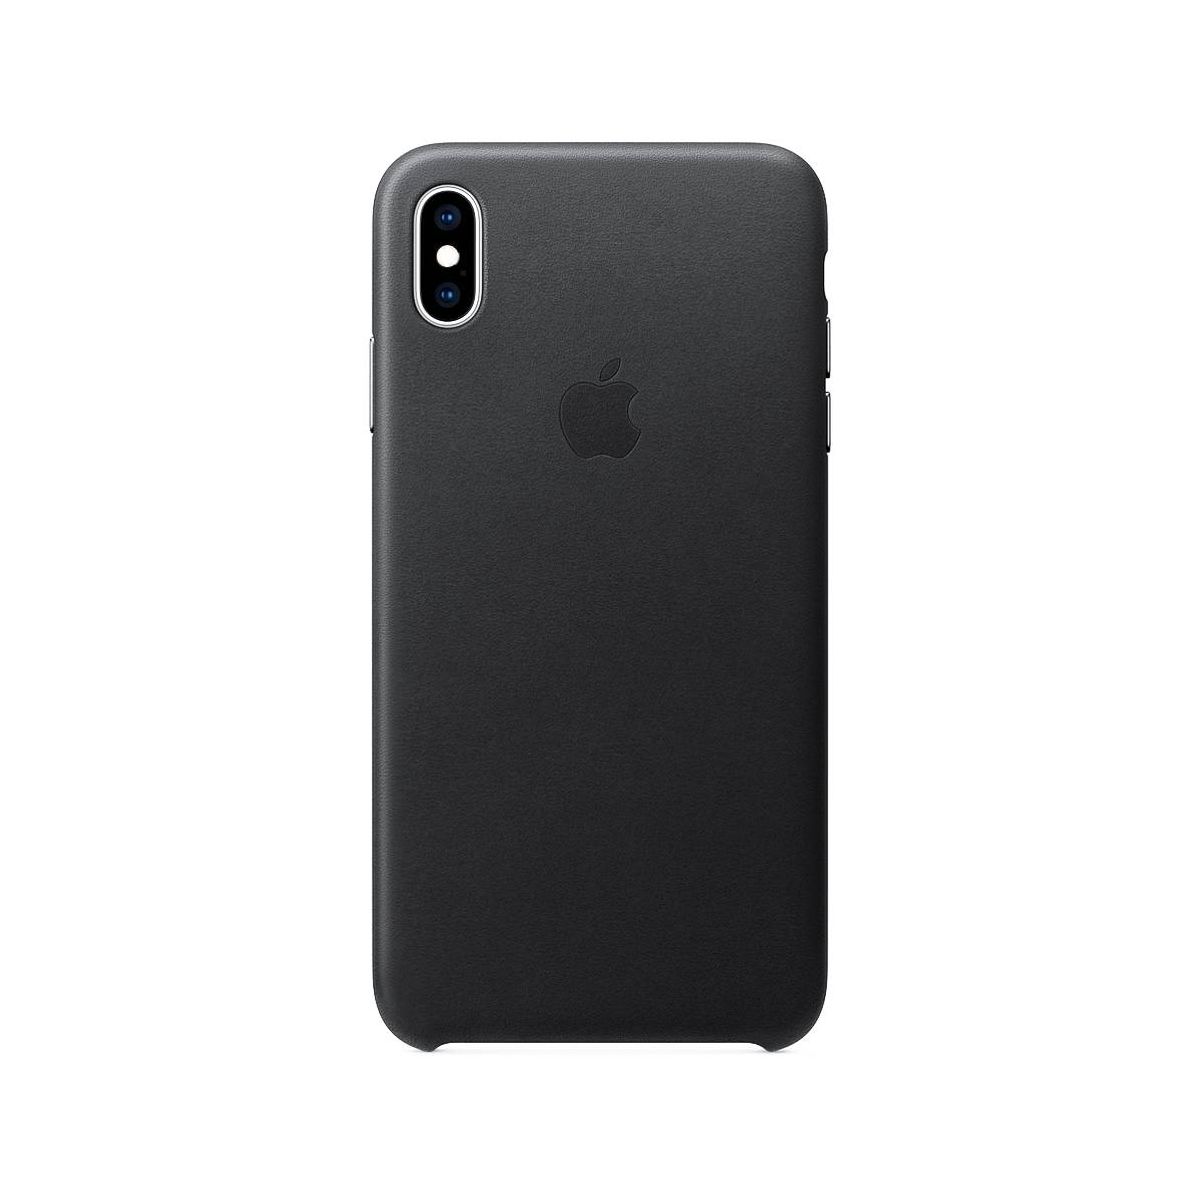 Apple Leather Backcover for iPhone Xs Max - Black